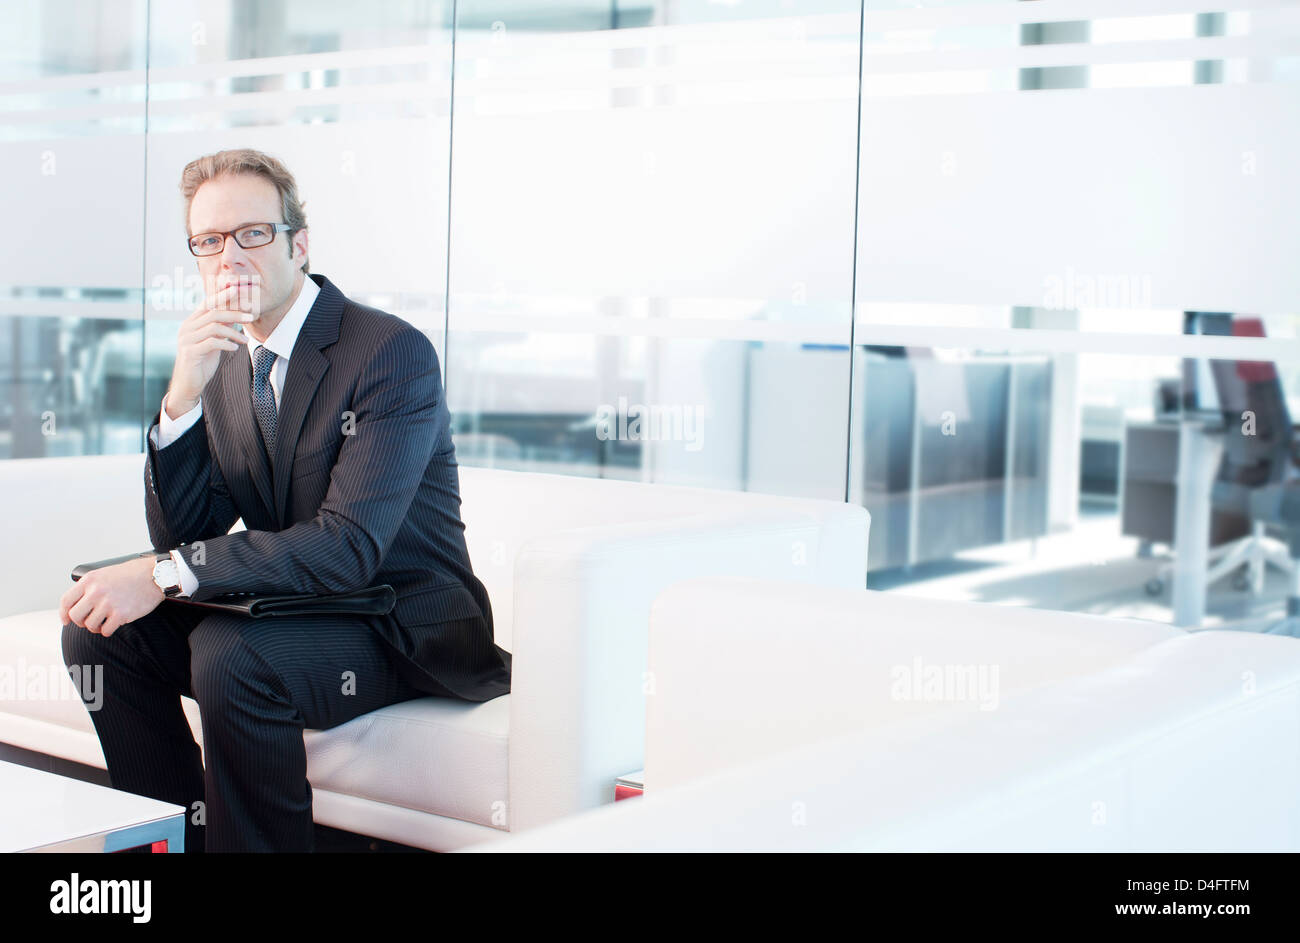 Businessman sitting on sofa in office lobby Stock Photo